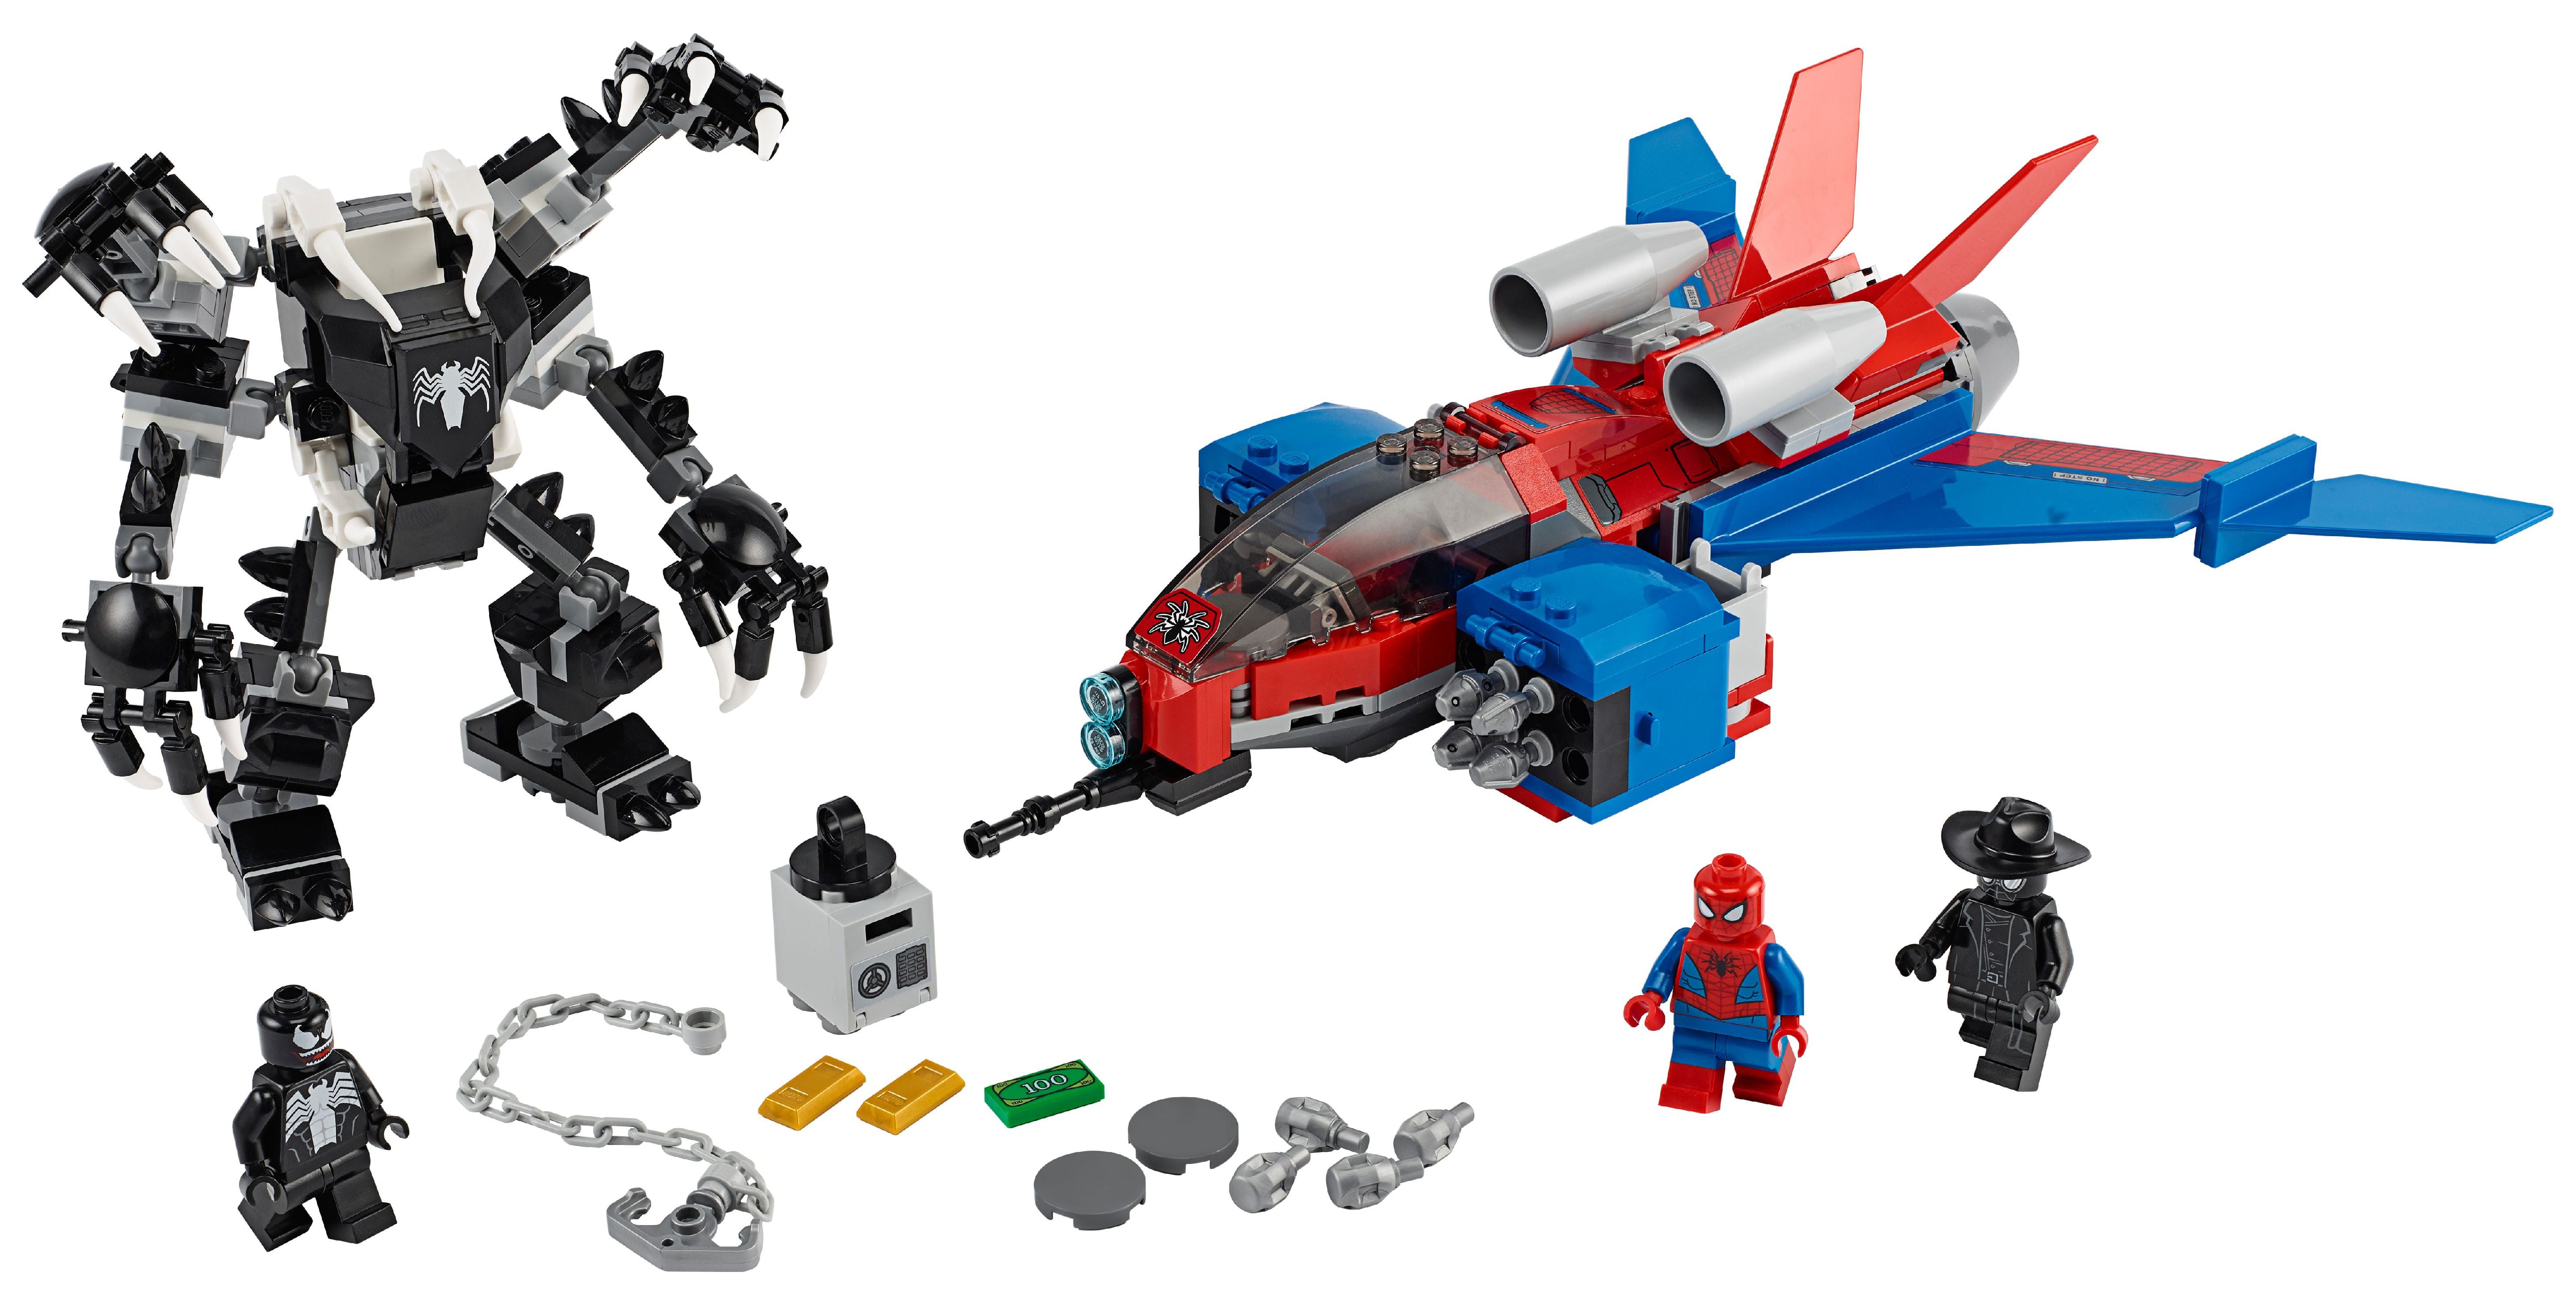 LEGO Marvel Spider-Man Spider-Jet vs Venom Mech 76150 Building Kit with Minifigures, Mech and Plane (371 Pieces) - image 3 of 7